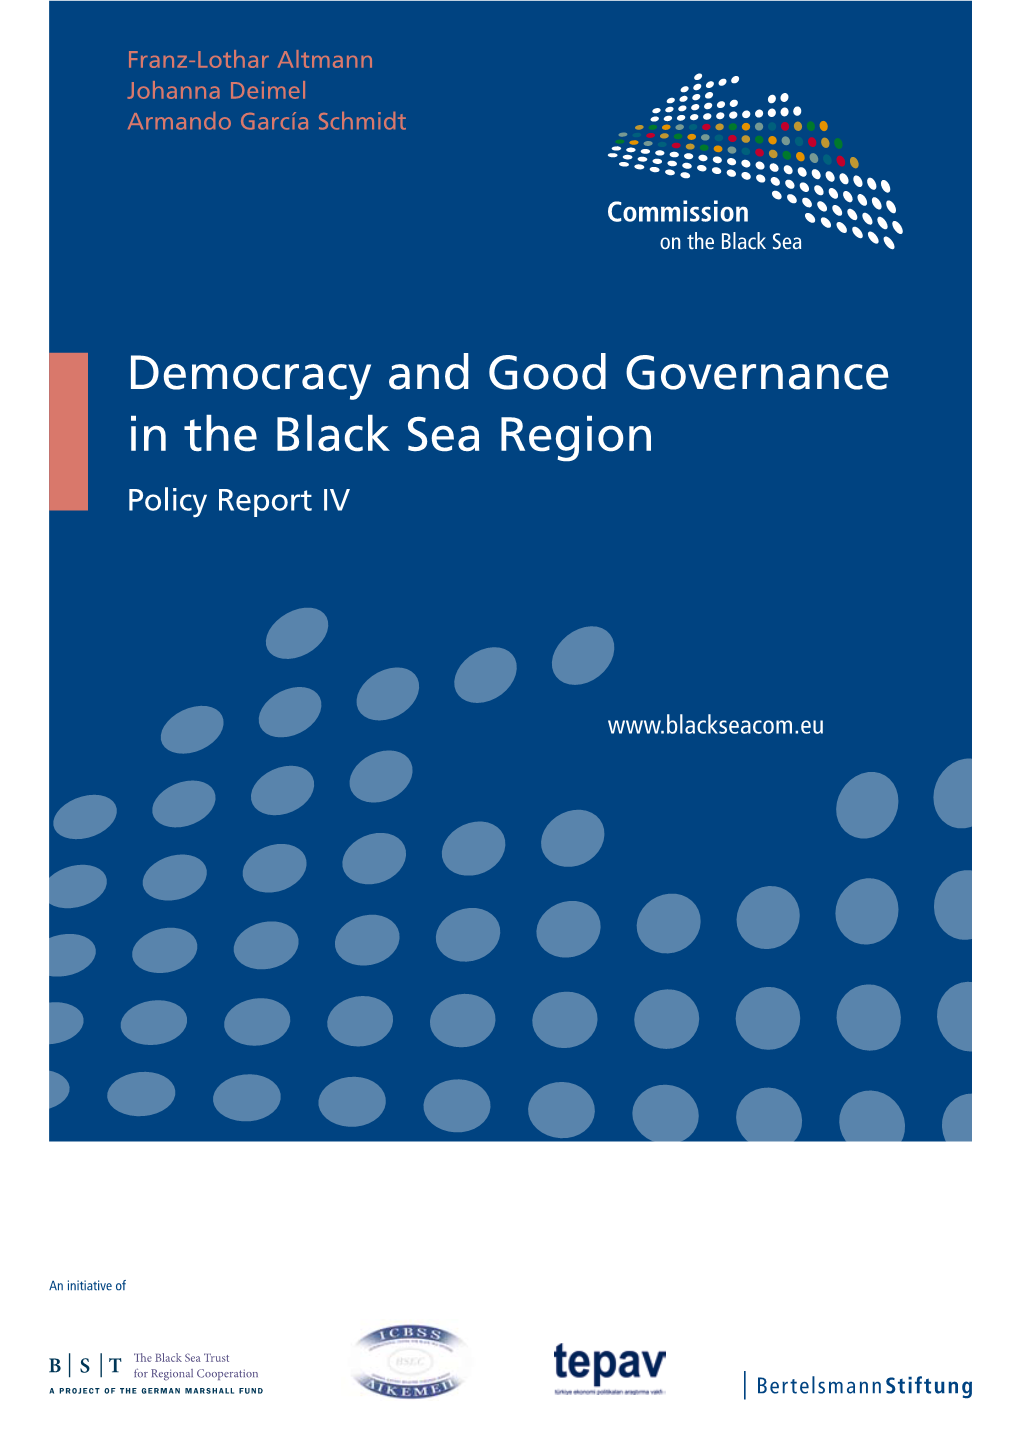 Democracy and Good Governance in the Black Sea Region Policy Report IV